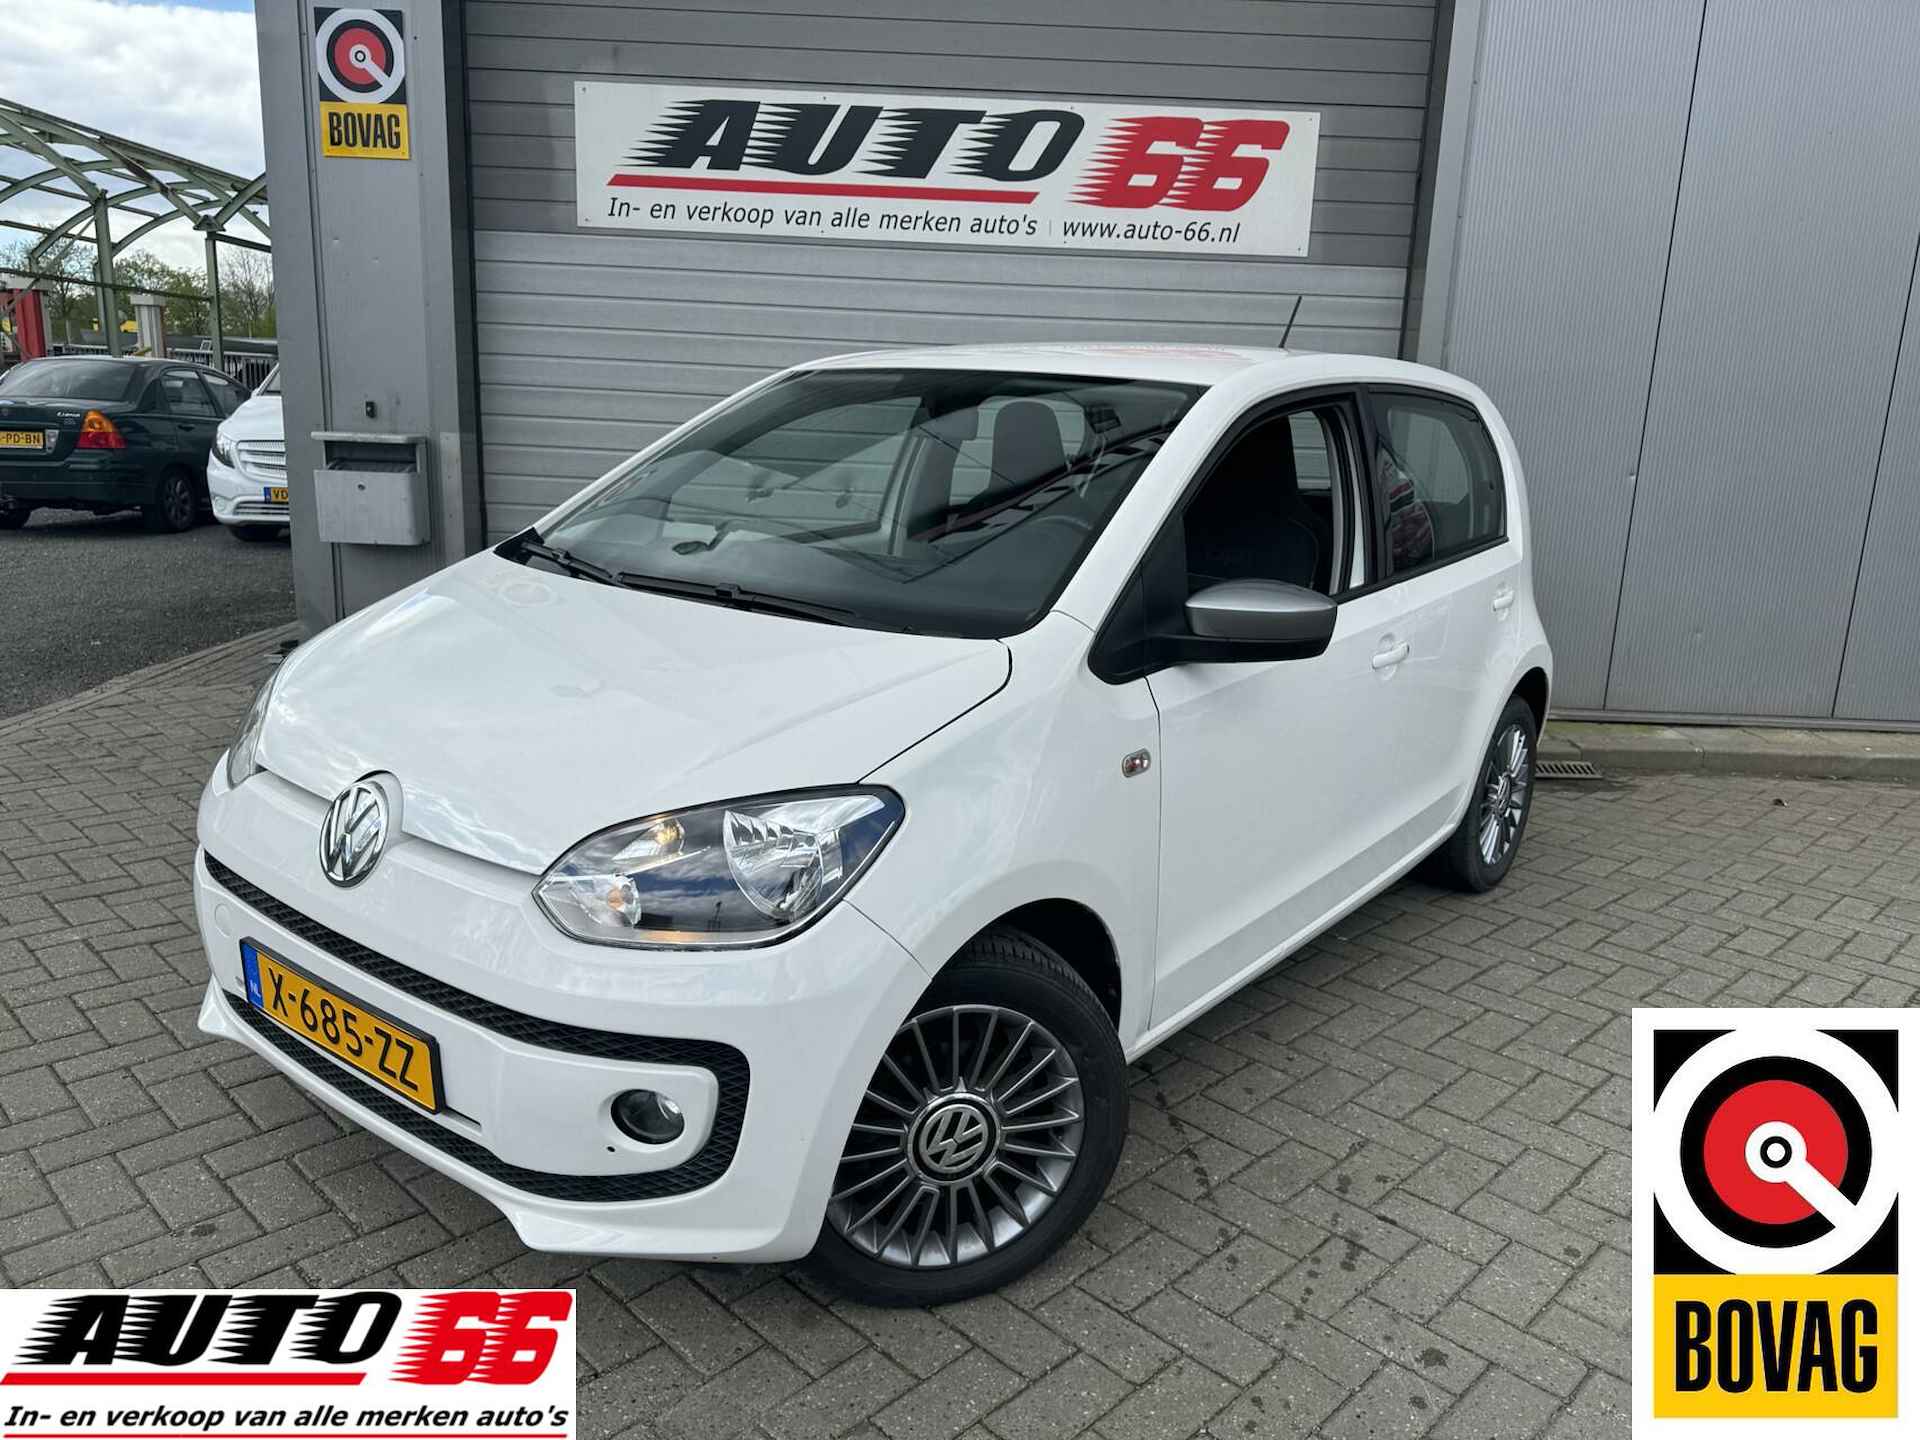 Volkswagen Up! 1.0 cheer BlueMotion 5 drs AIRCO APK tot 2025 - 1/18